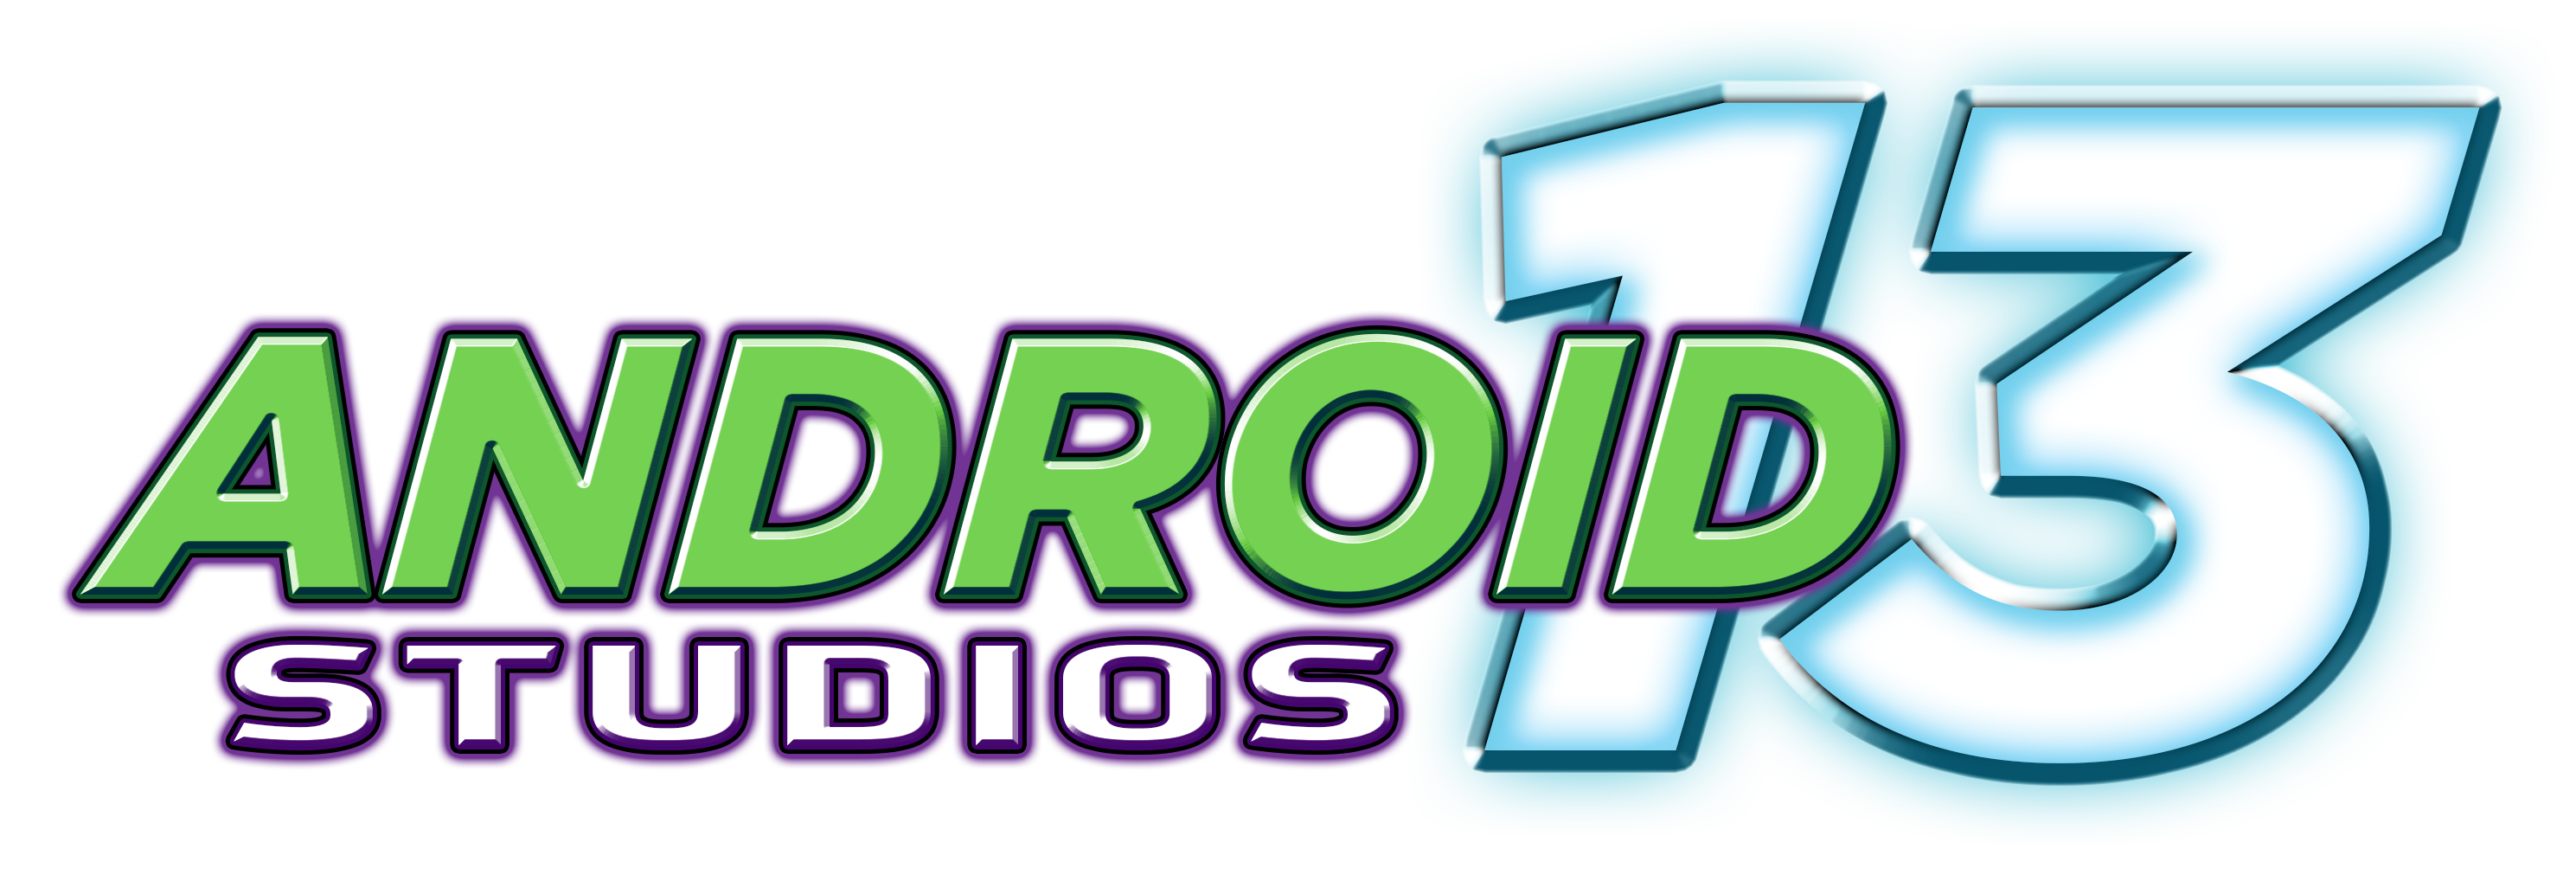 Android 13 Studios